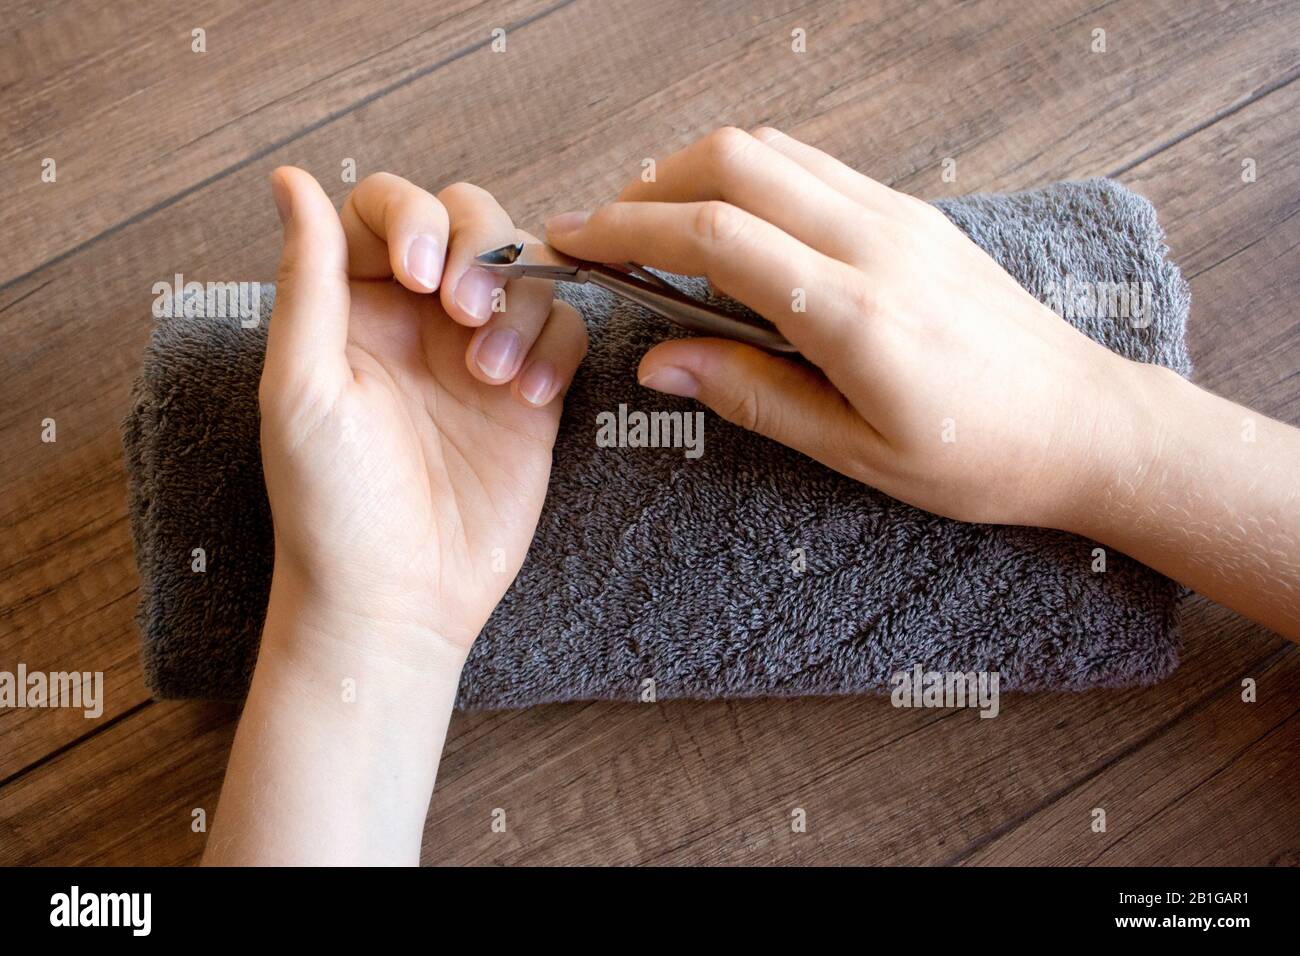 Hand care, folk hand care. Manicure. Spa procedure for beauty hands. Beauty and spa concept. Stock Photo